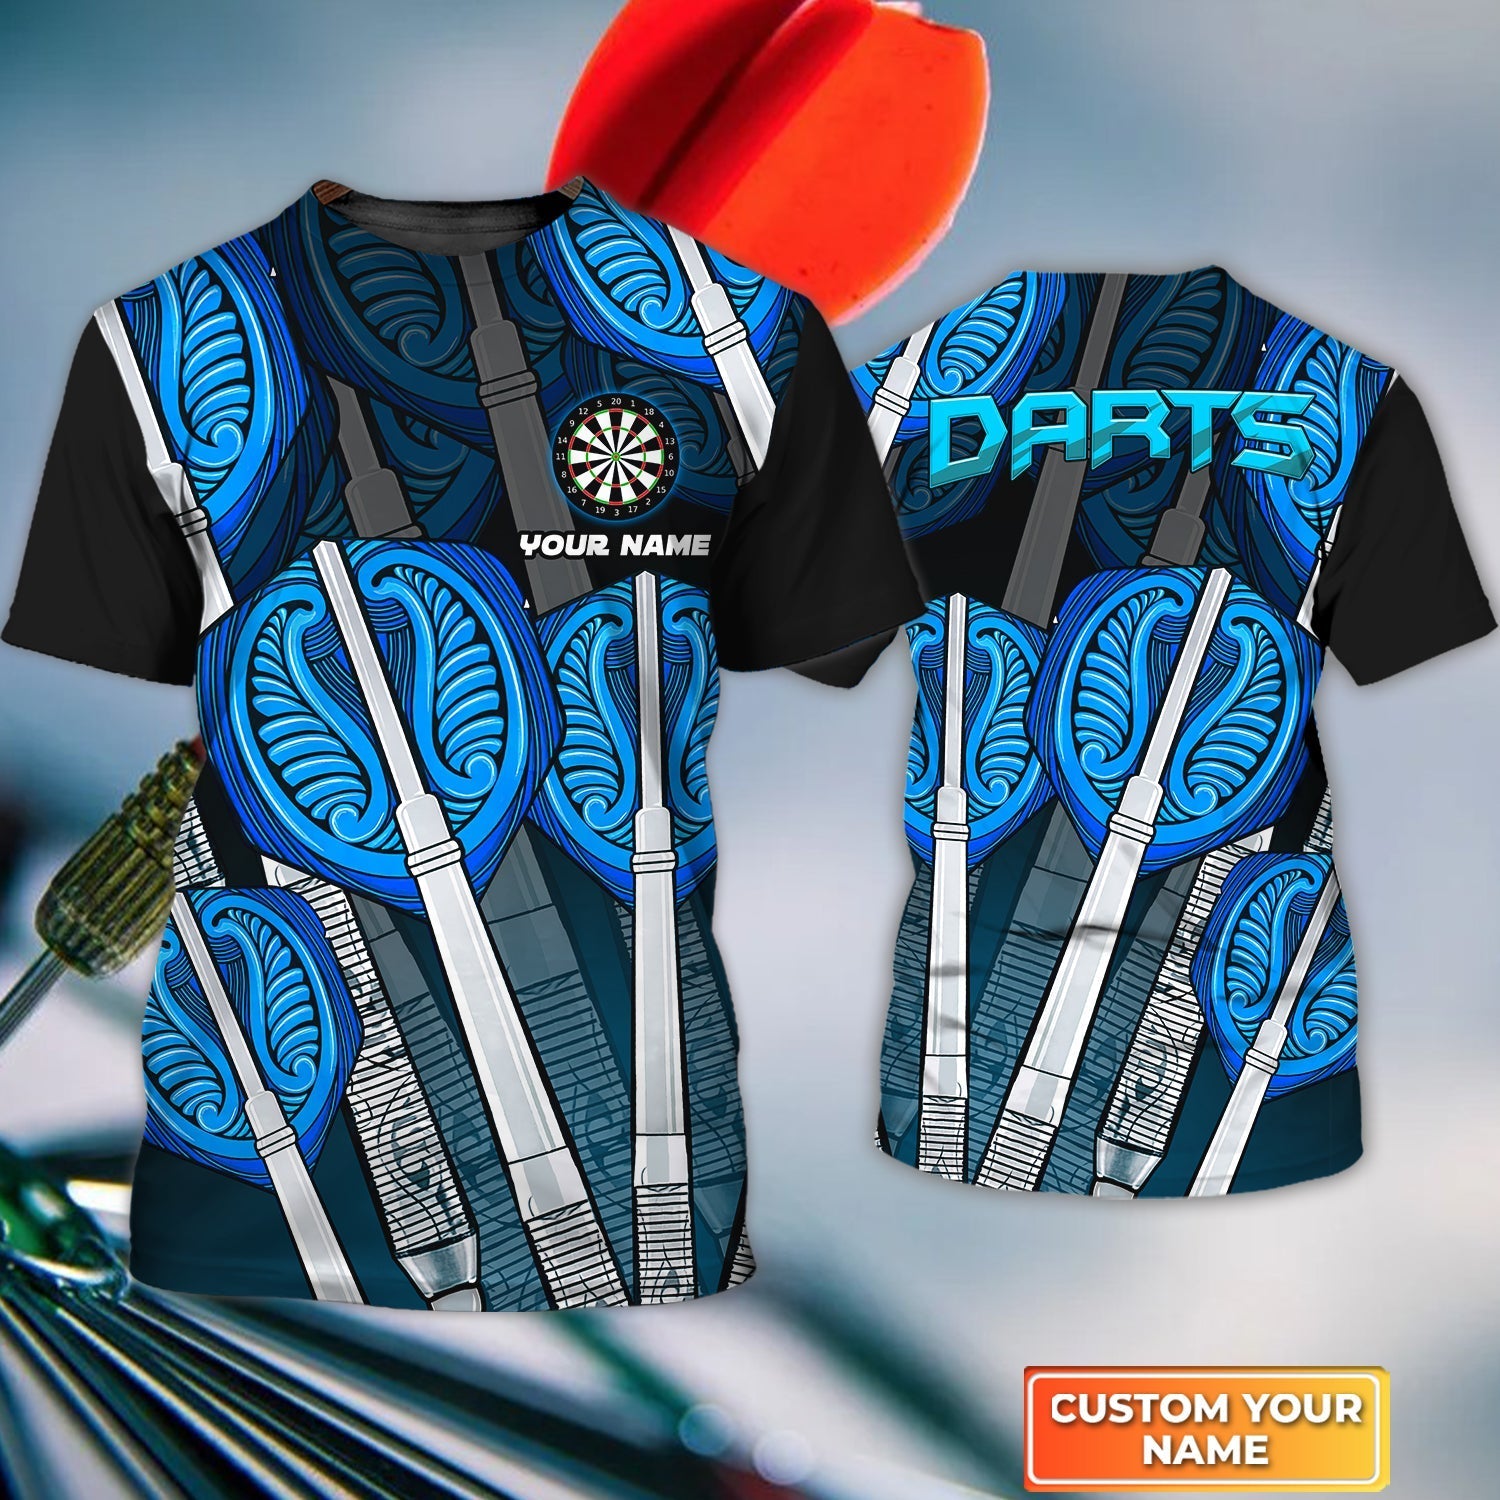 I Play Darts Because I Like It, Personalized Name 3D Tshirt For Darts Player – DT015